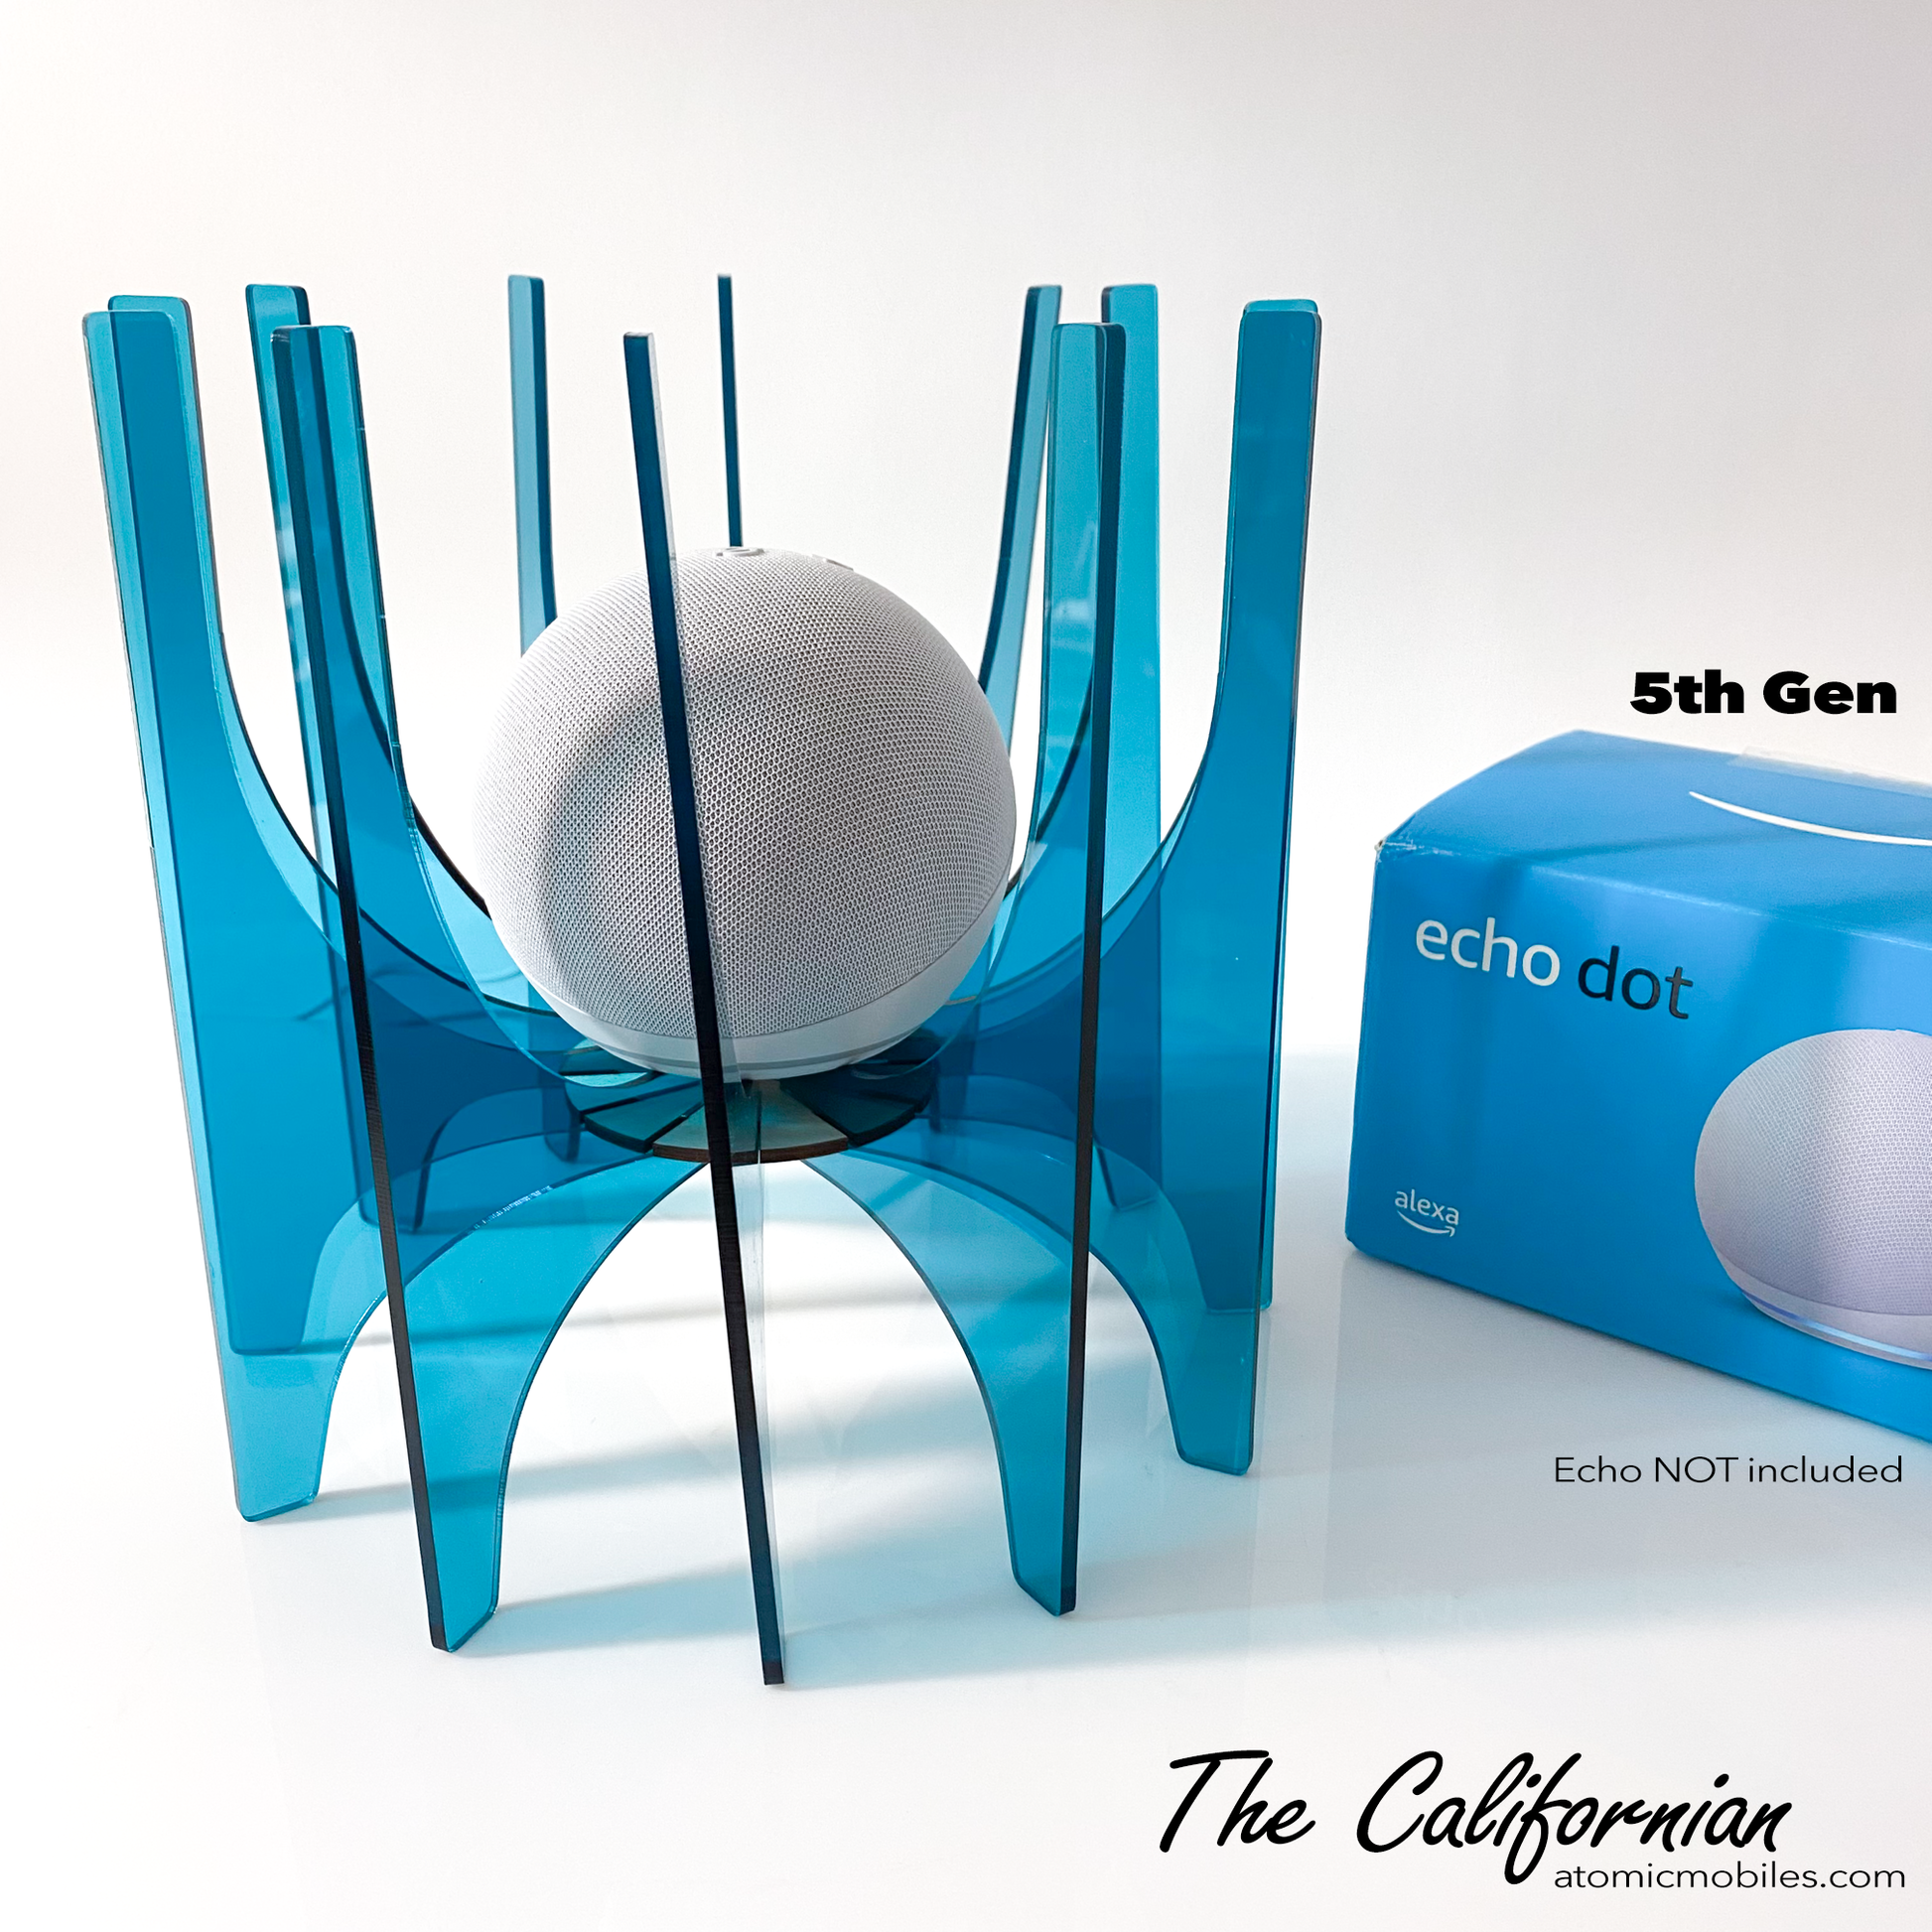 The California Space Age Holder for the Amazon Echo DOT 5th Gen Alexa speaker (Echo not included) - mid century modern style holder by AtomicMobiles.com